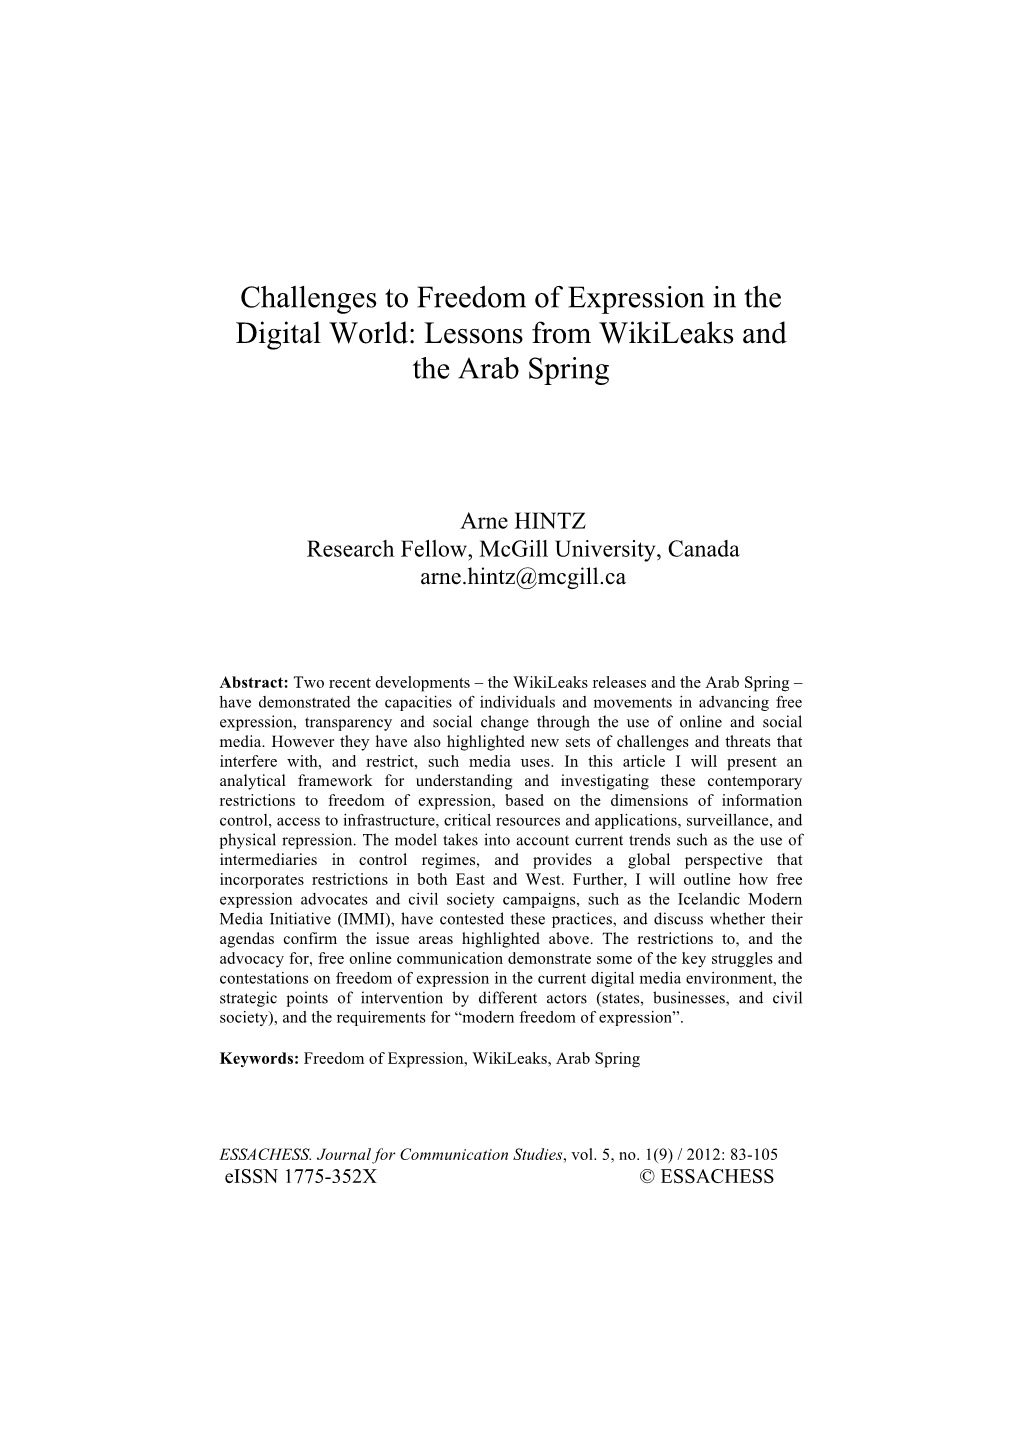 Challenges to Freedom of Expression in the Digital World: Lessons from Wikileaks and the Arab Spring